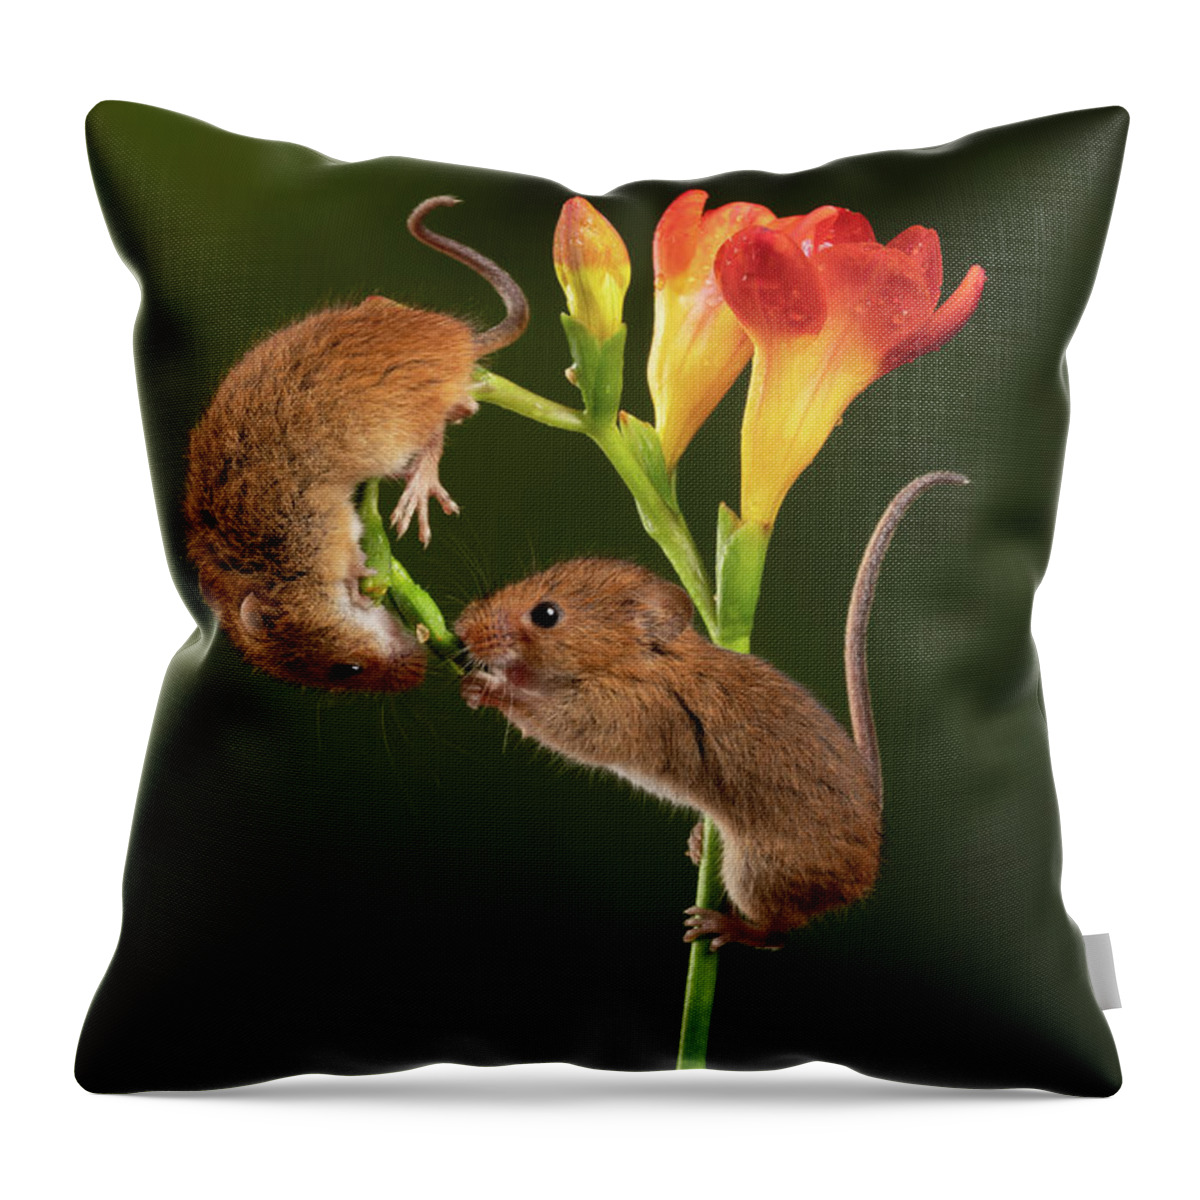 Harvest Throw Pillow featuring the photograph Hm-5332 by Miles Herbert